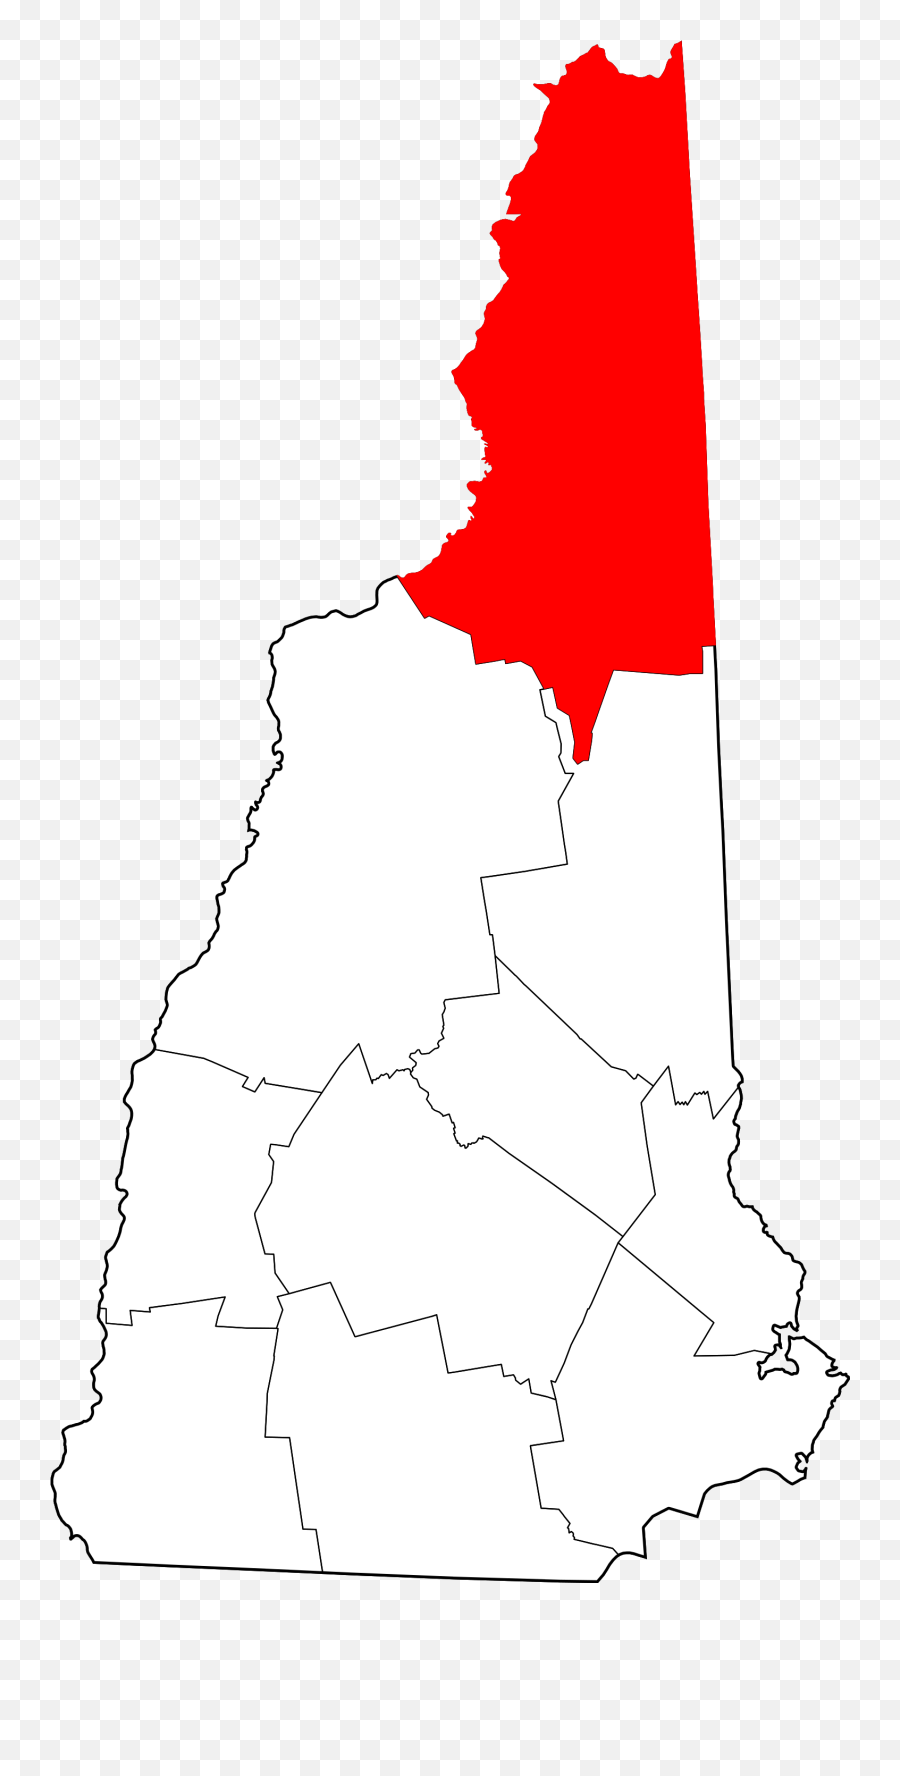 Map Of New Hampshire Highlighting Coos County - Coos County Seals New Hampshire Emoji,Location Emoji